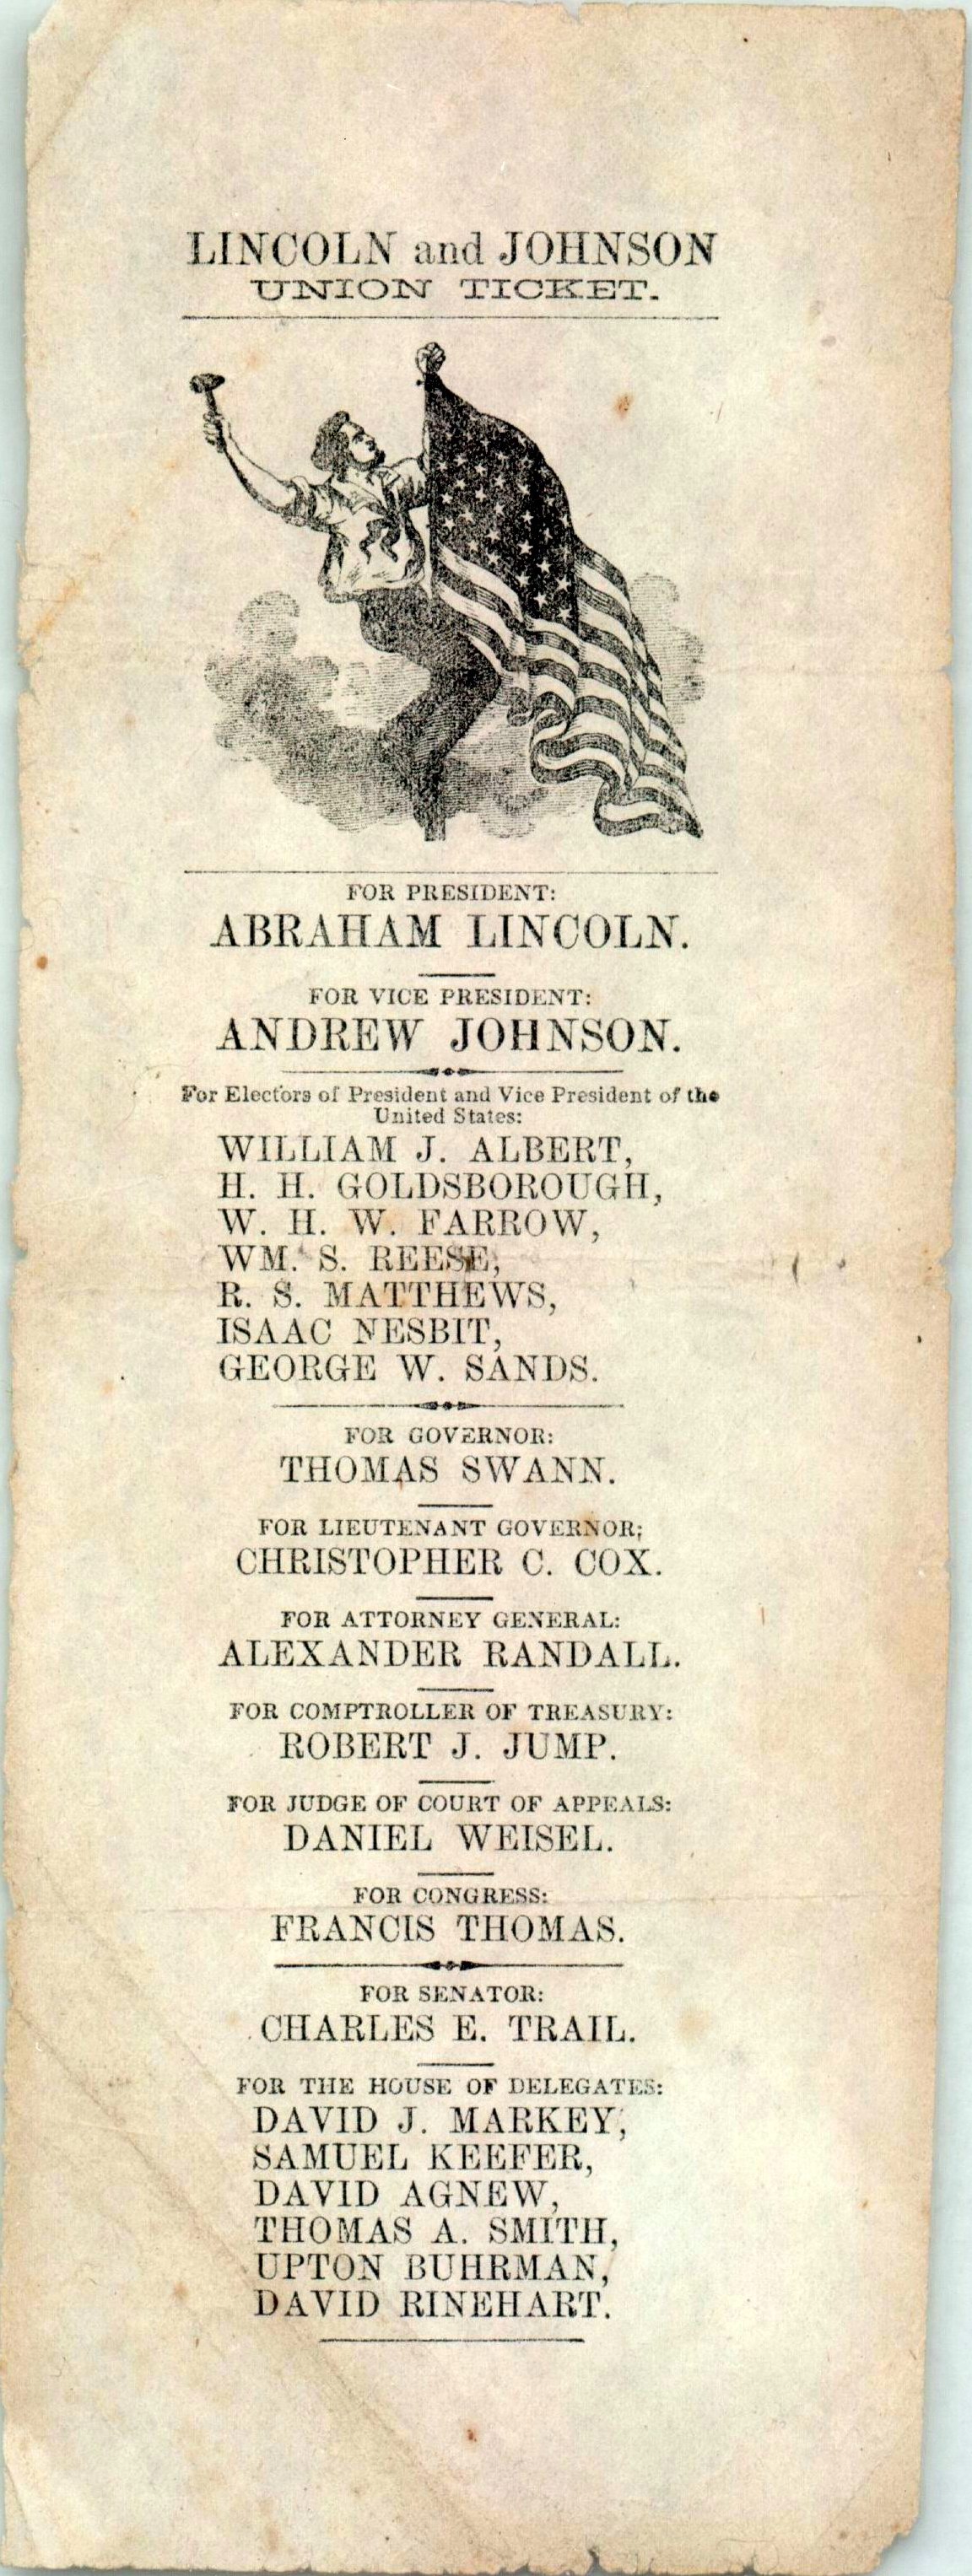 Republican Party election ticke featuring Abraham Lincoln for president and Charles E. Trial for Maryland Senator, 1864